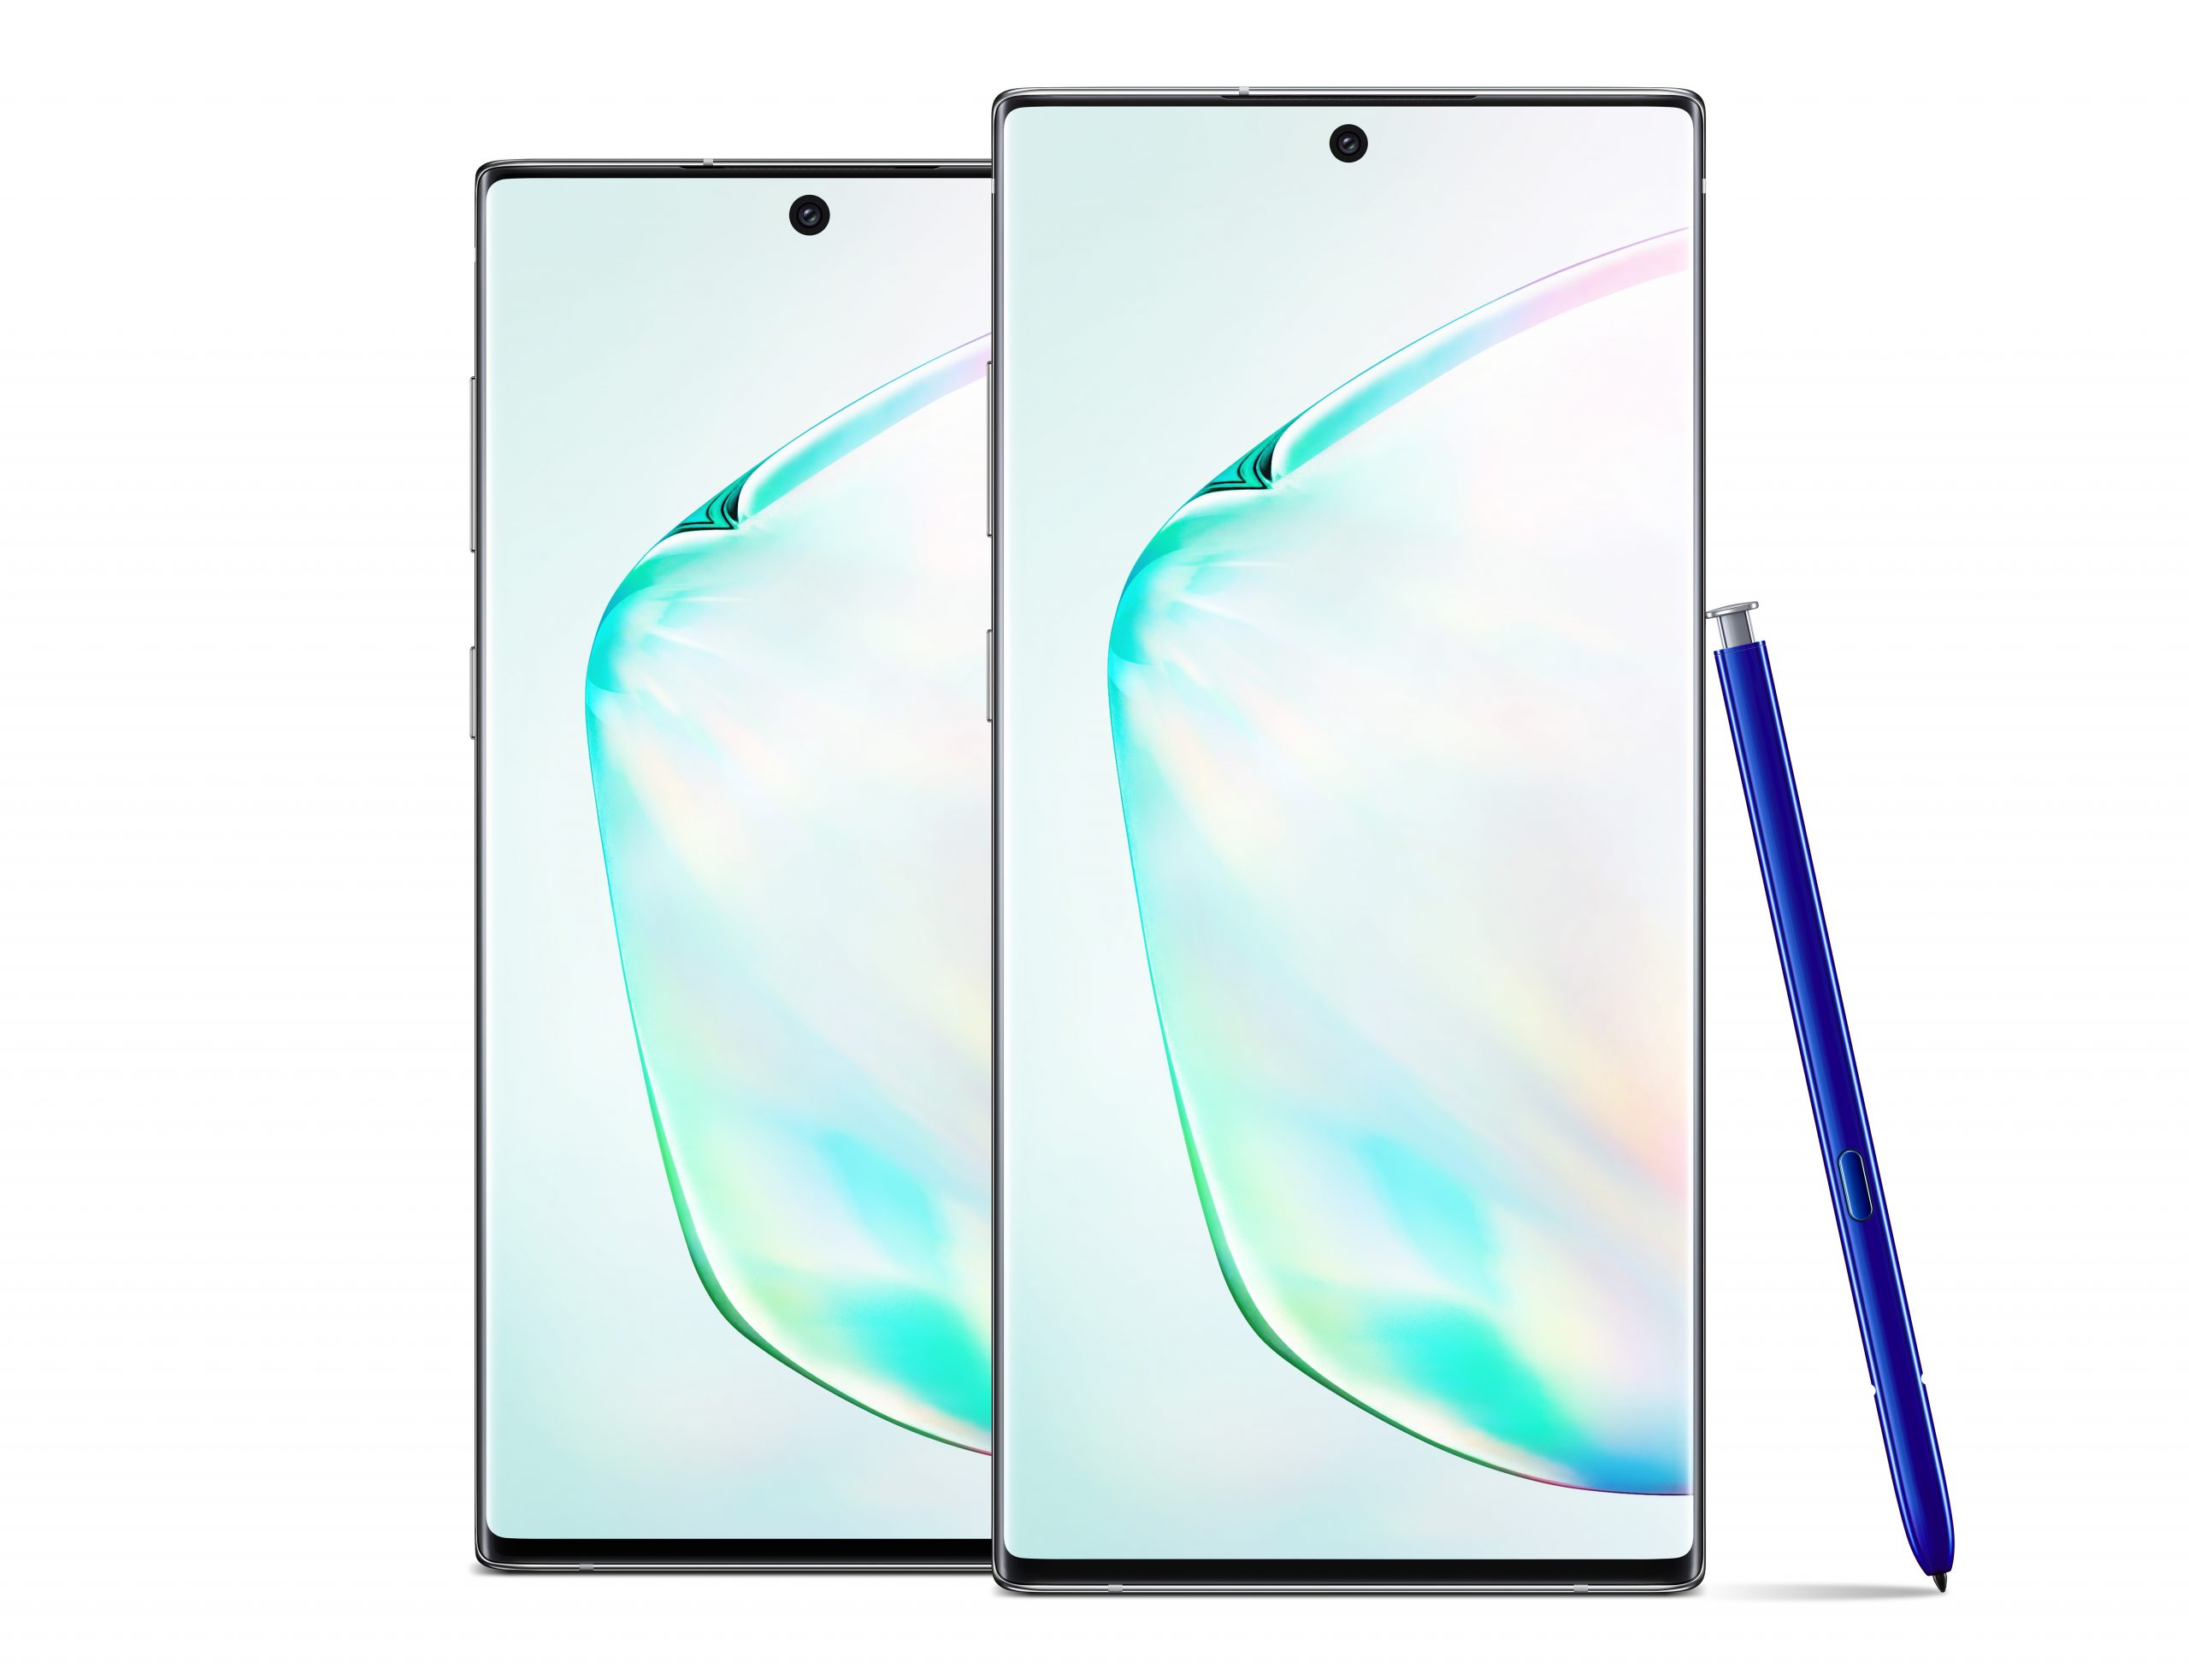 Samsung Note 10 and Note 10 Plus even more are here. Android phones are giants for you?